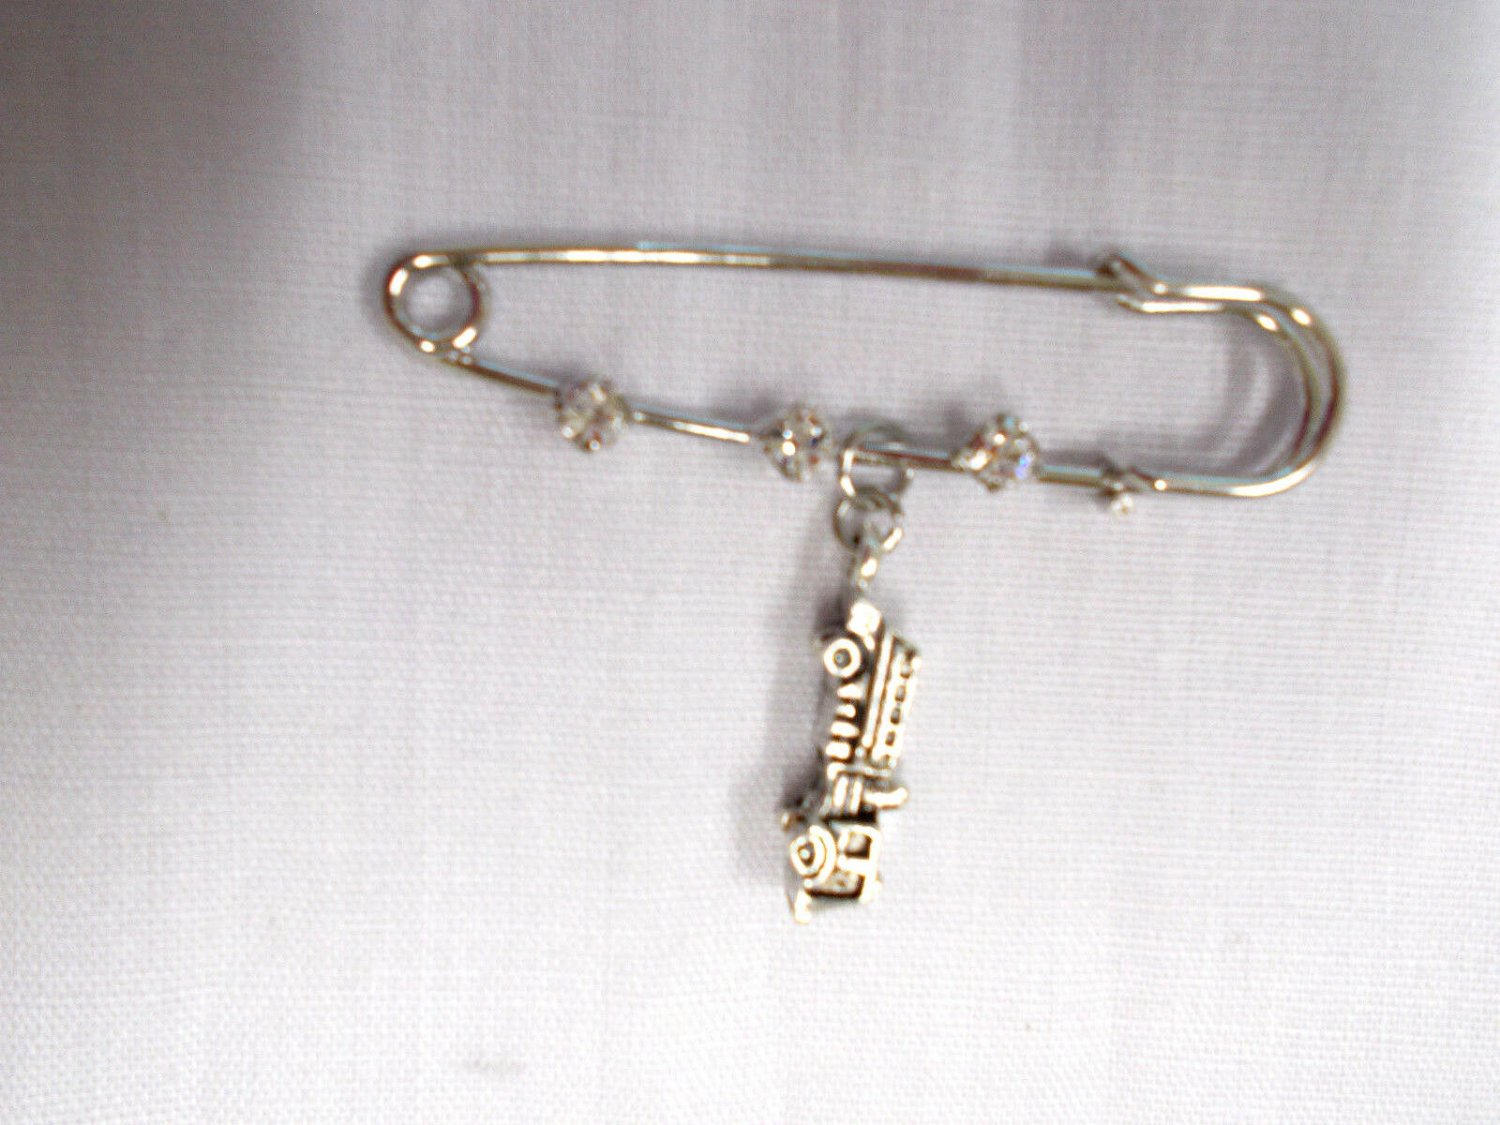 2" SAFETY PIN w 3 CRYSTALS BROOCH & FIRE TRUCK FIRST RESPONDER BRAVE HERO CHARM